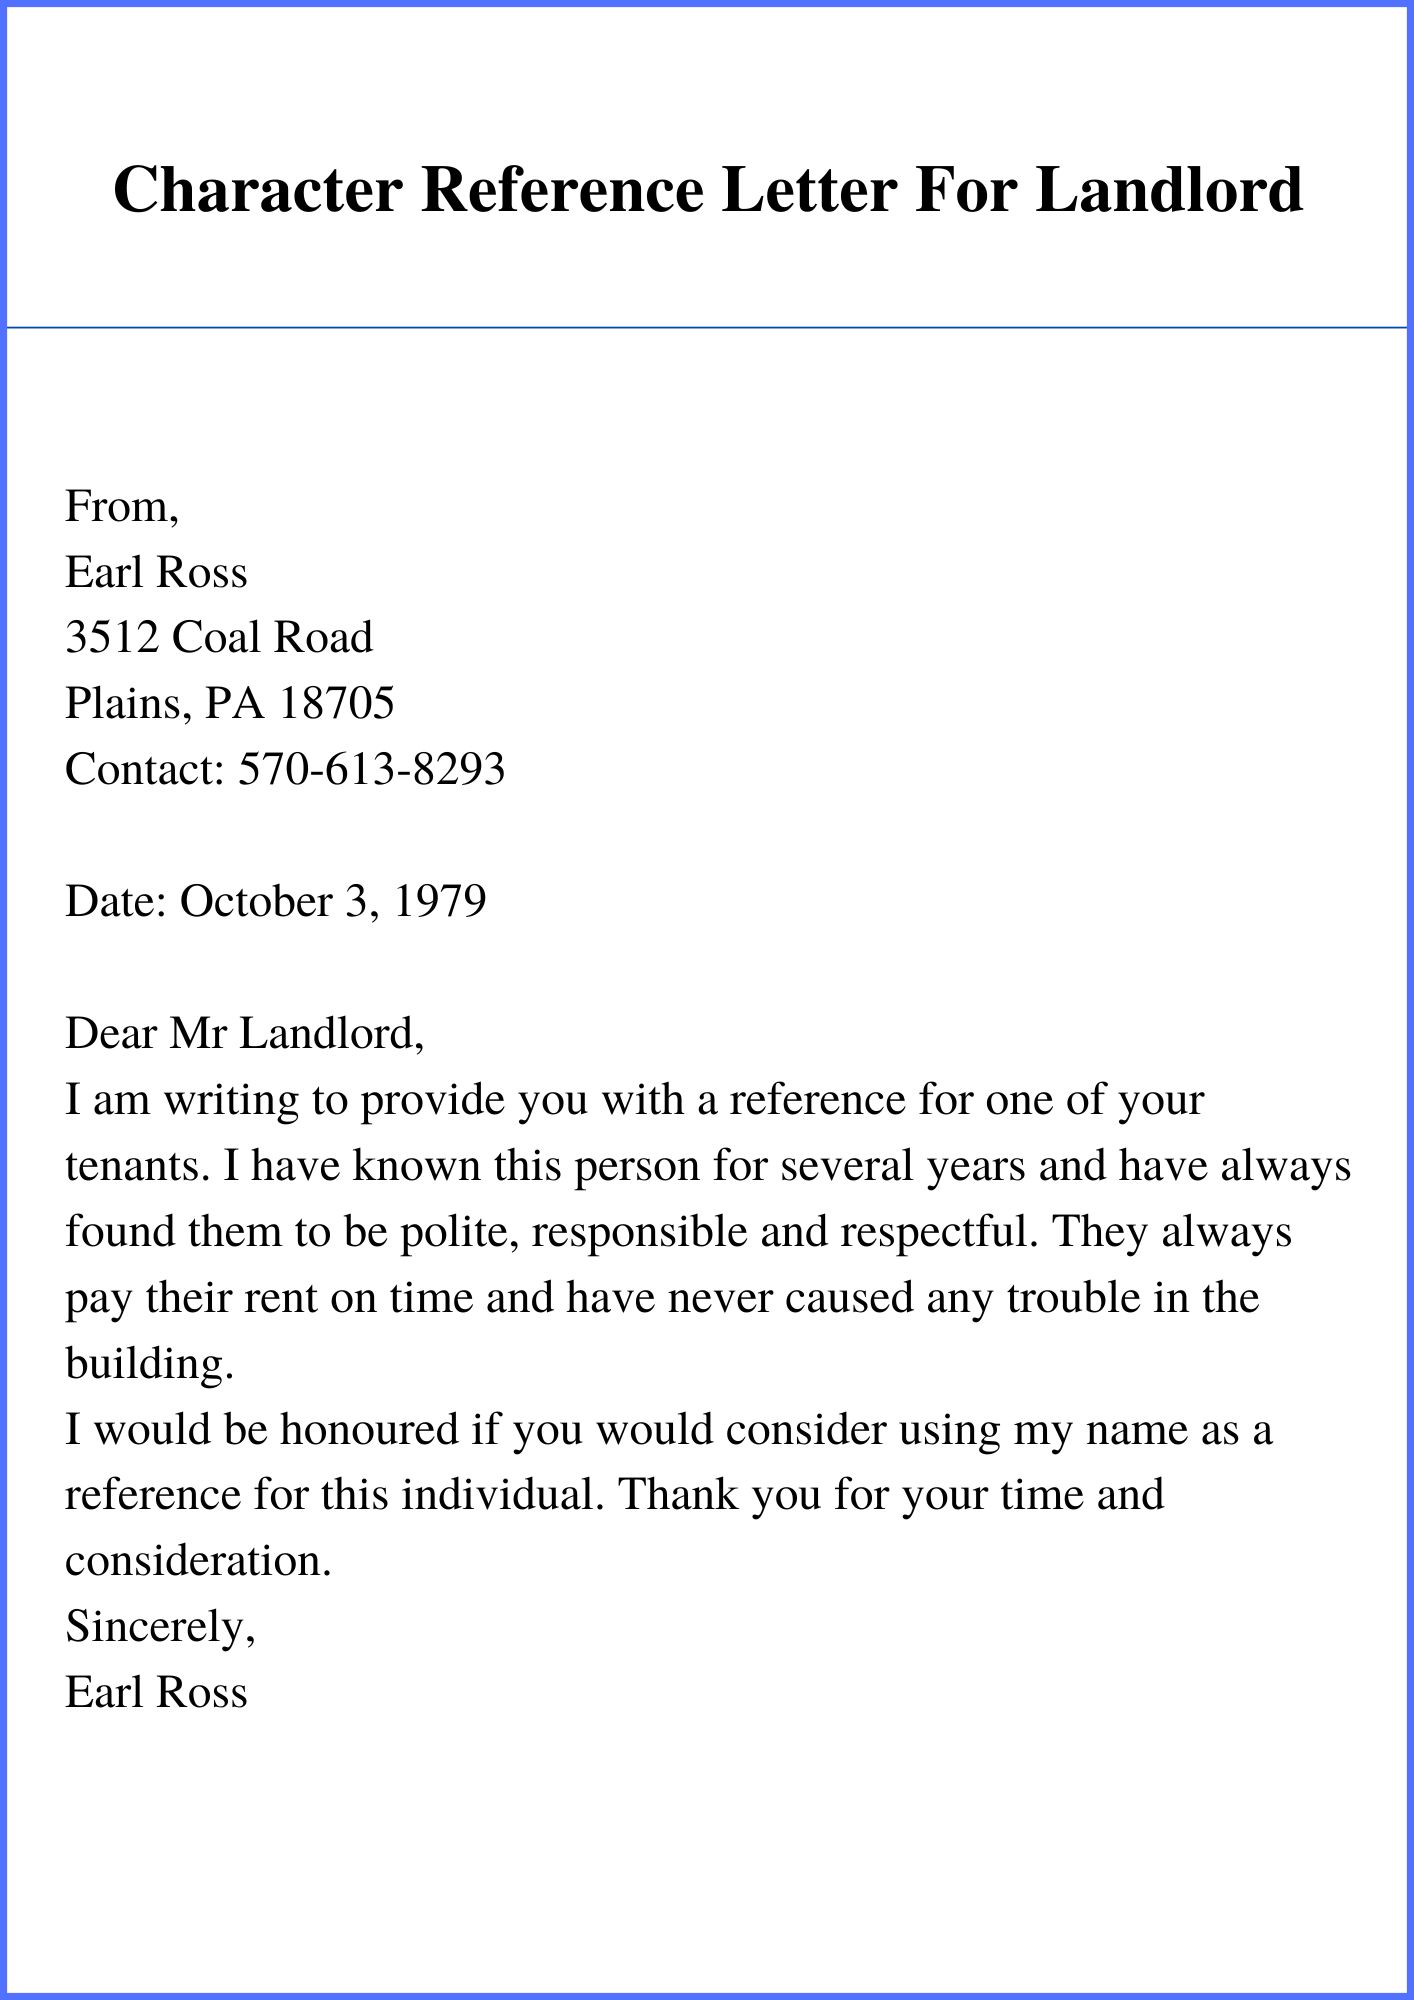 Character Reference Letter For Landlord Sample